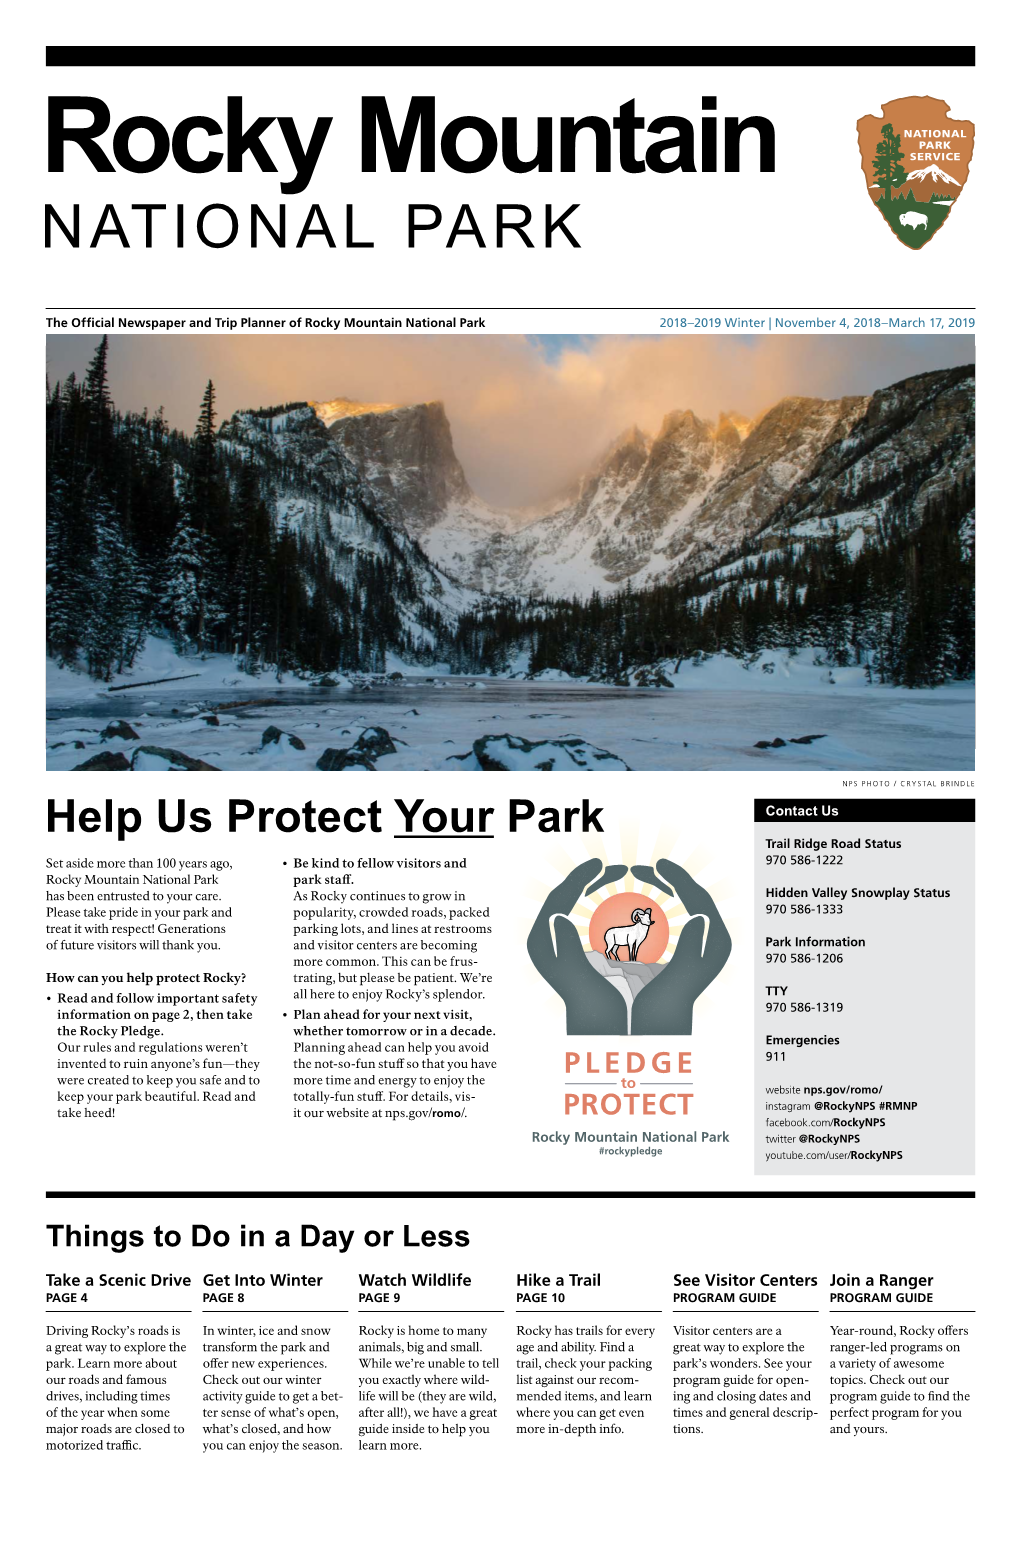 Rocky Mountain National Park Official Newspaper